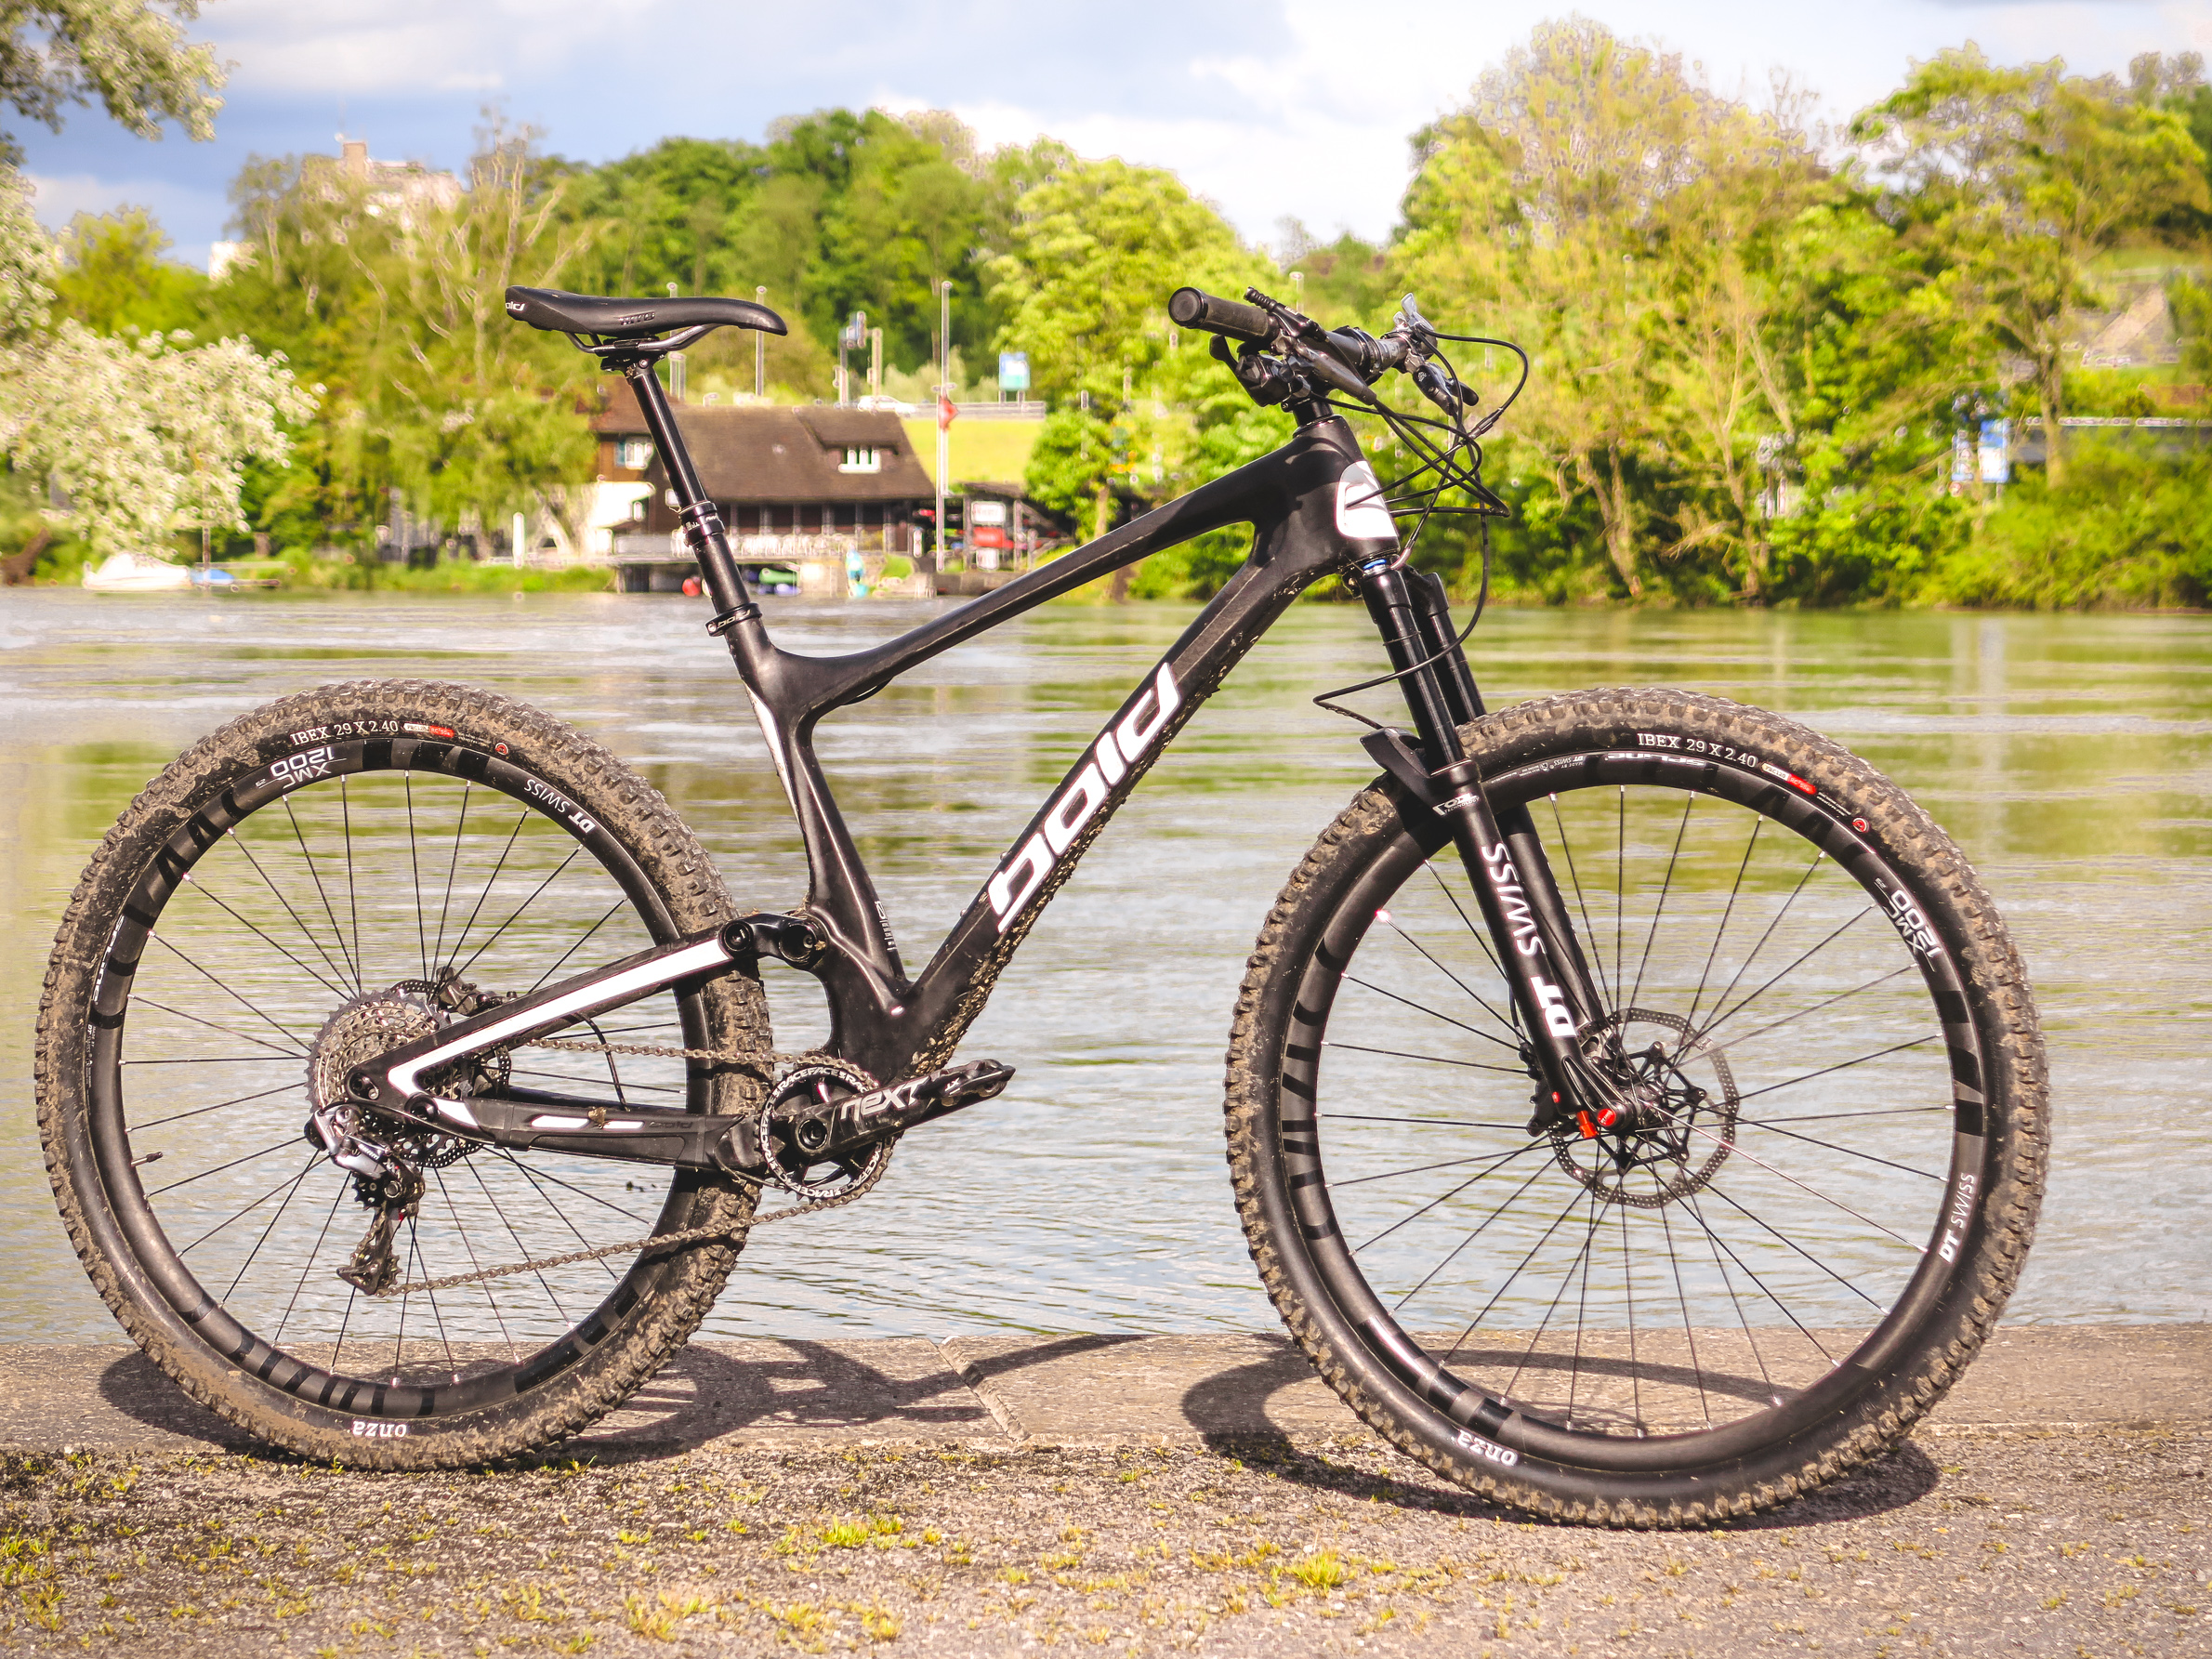 Bold Cycles Linkin: erster Test des innovativen Edel-Trail-Bikes